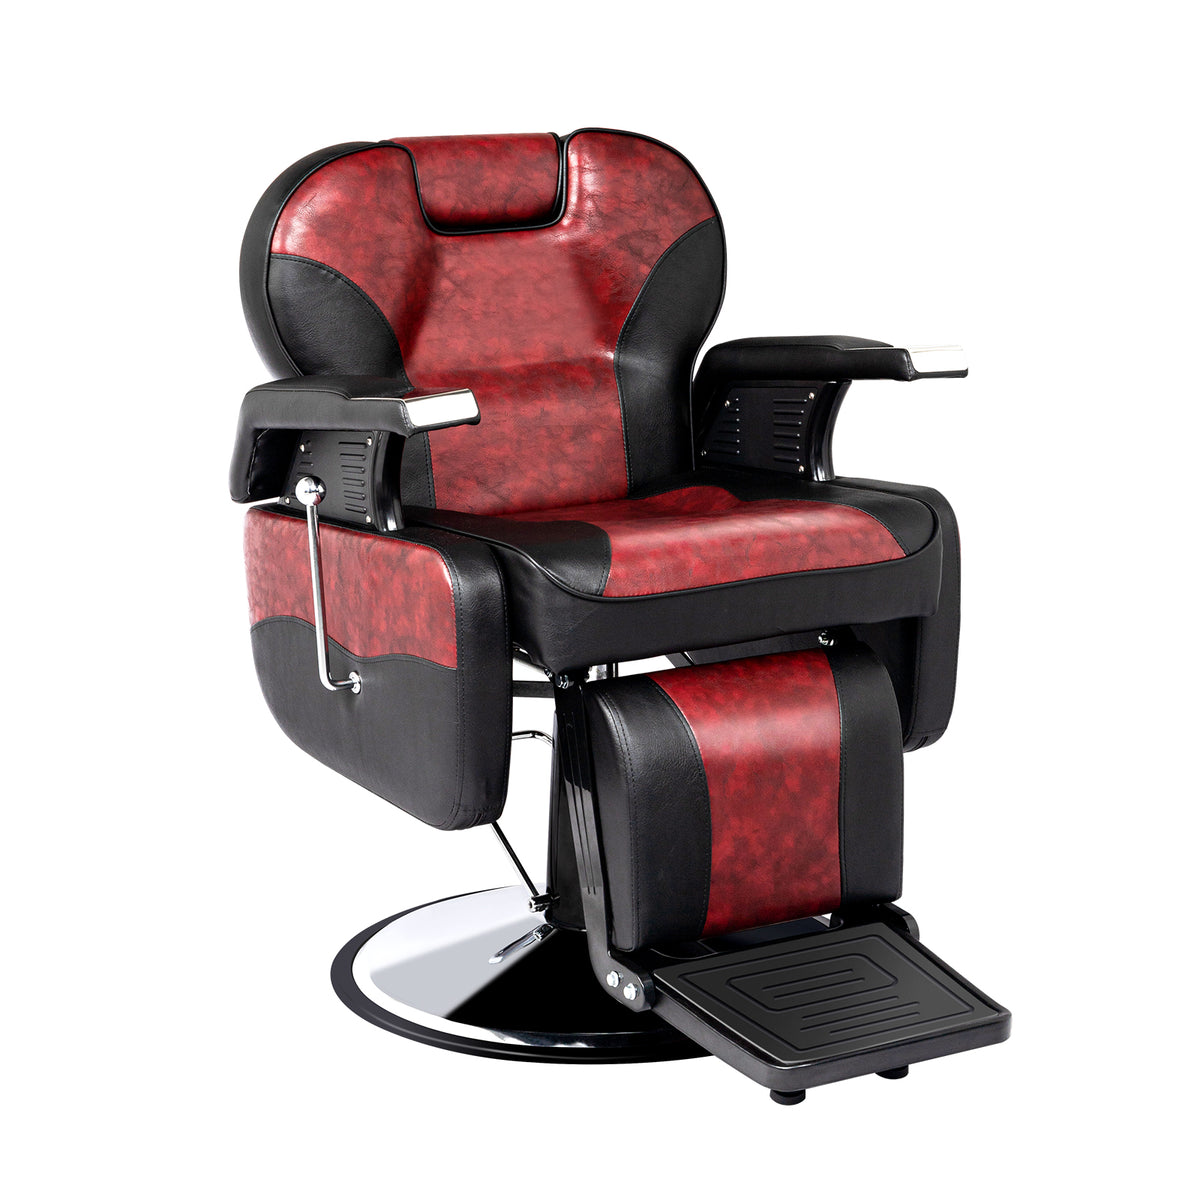 OmySalon BC1201 Classical Style Heavy Duty Hydraulic Reclining Barber Chair Black & White/Black & Red